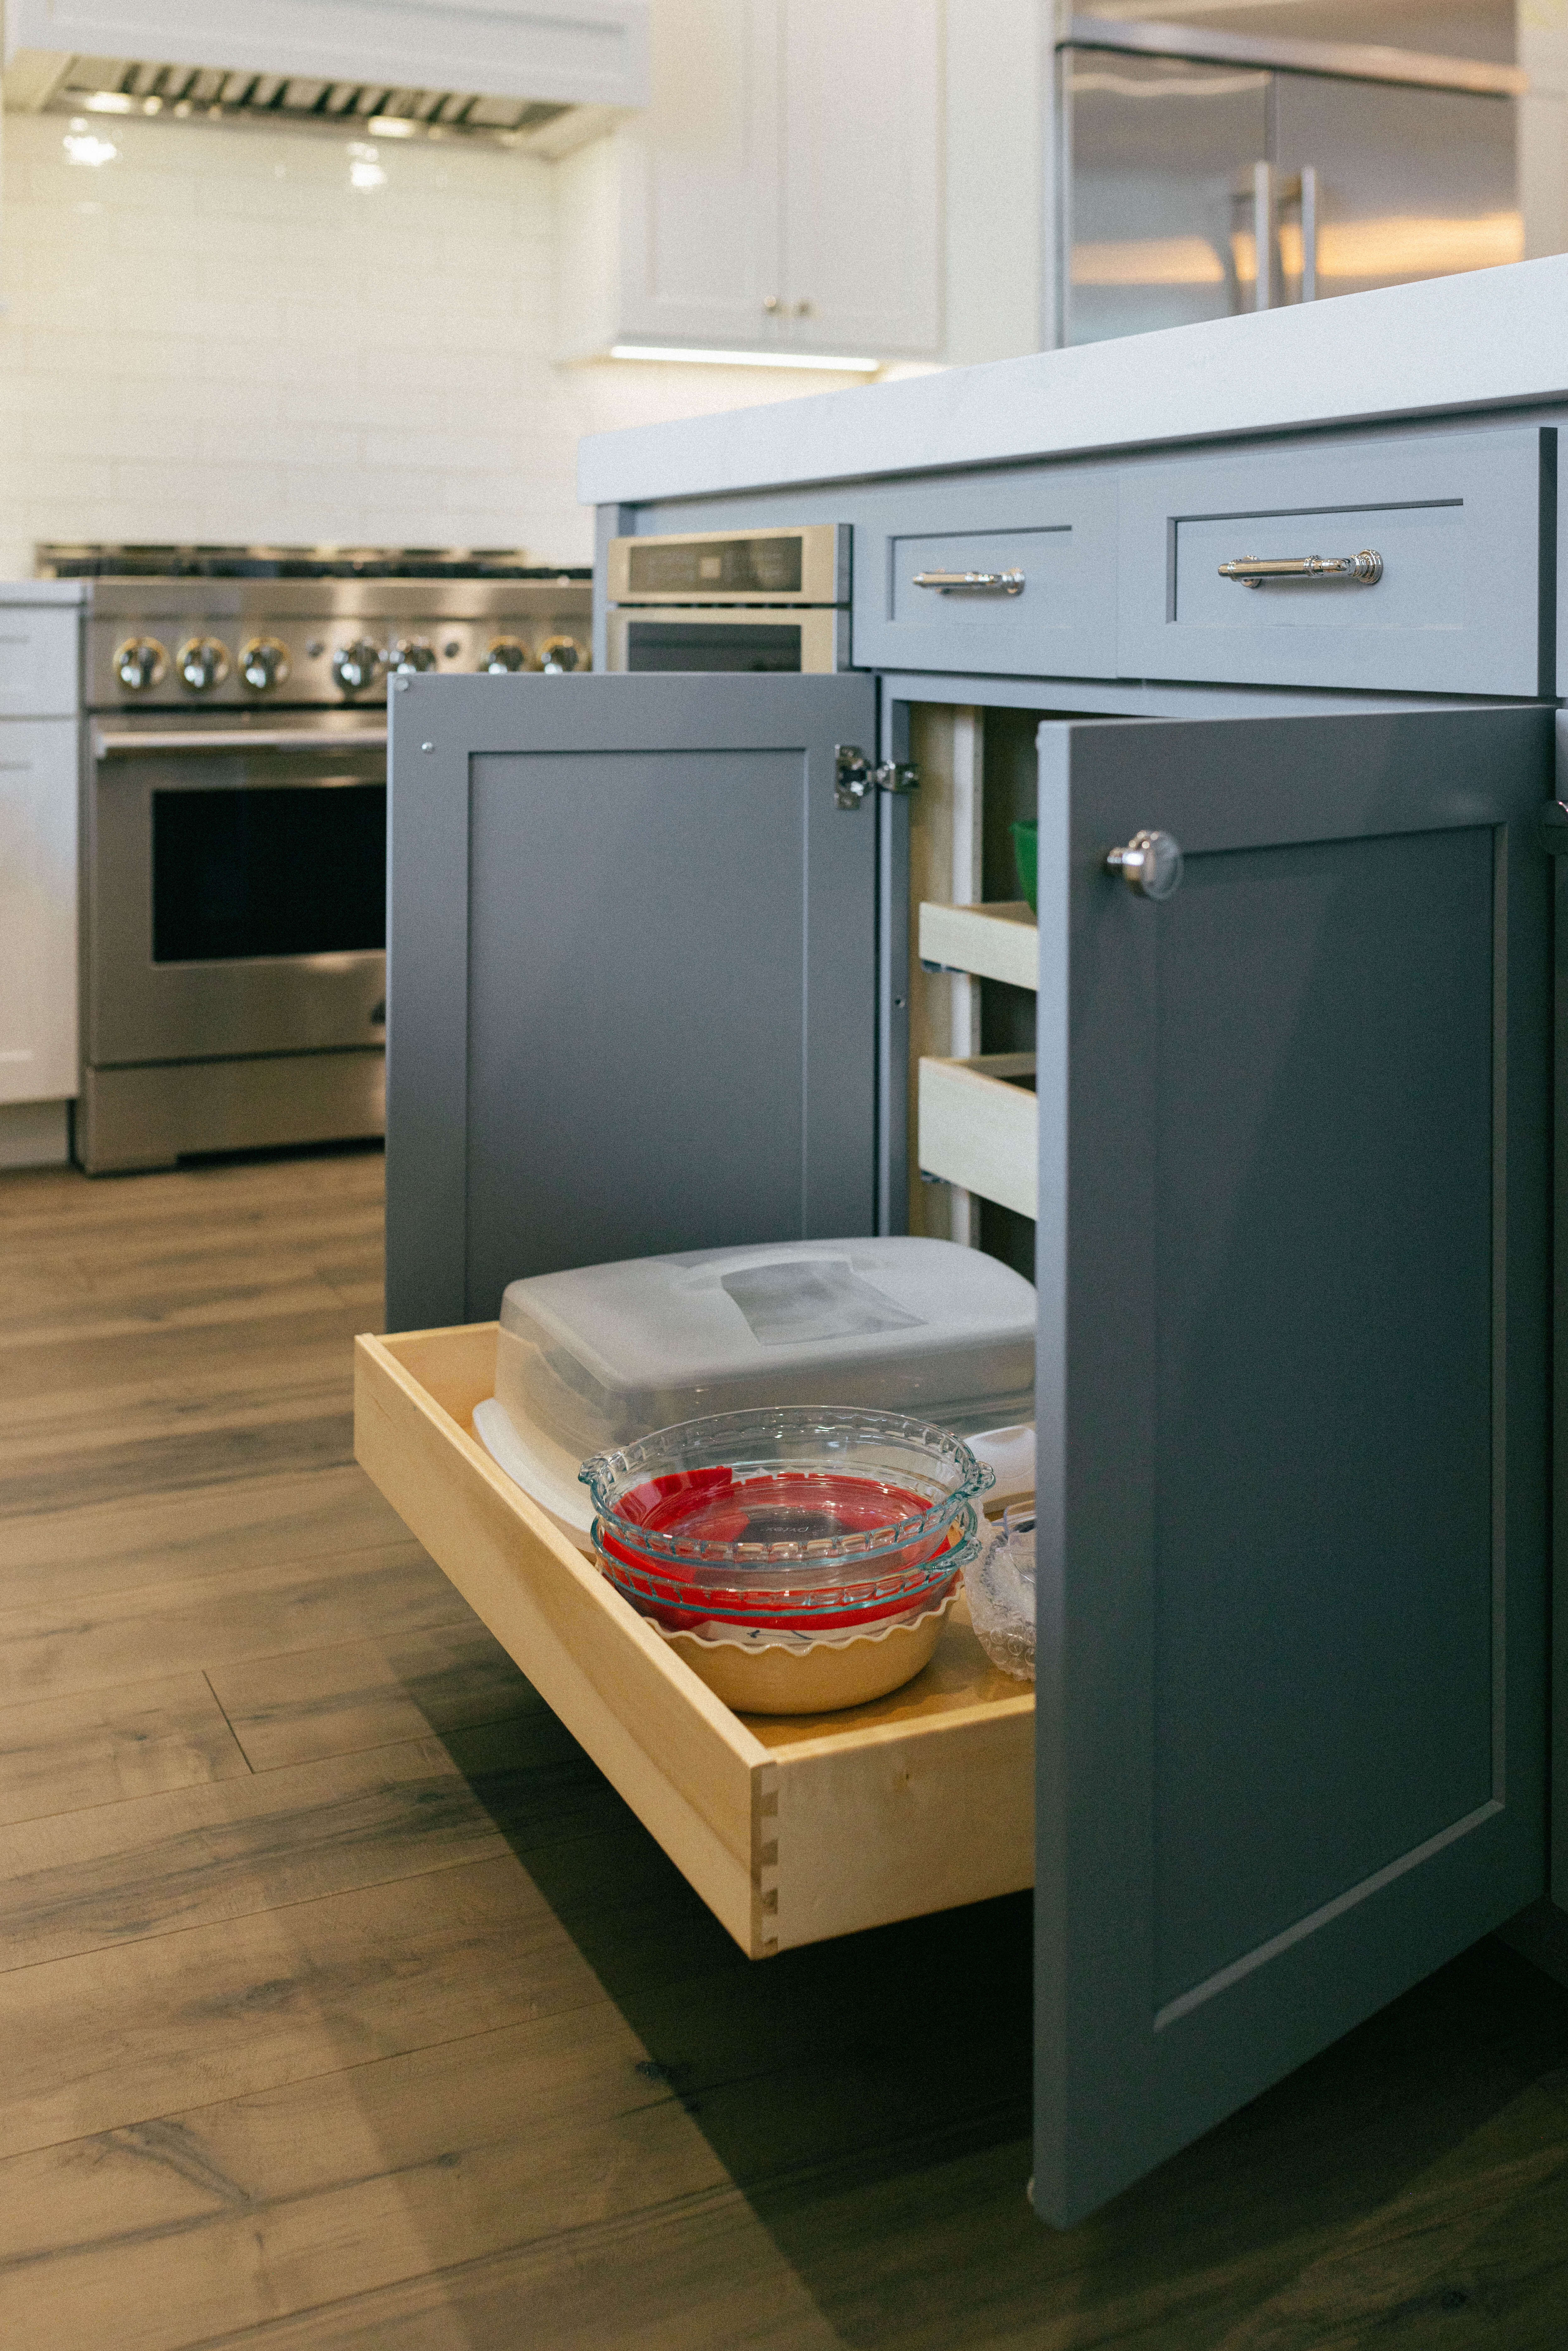 A dark gray painted kitchen island with roll-out shelf storage for baking containers and lids.